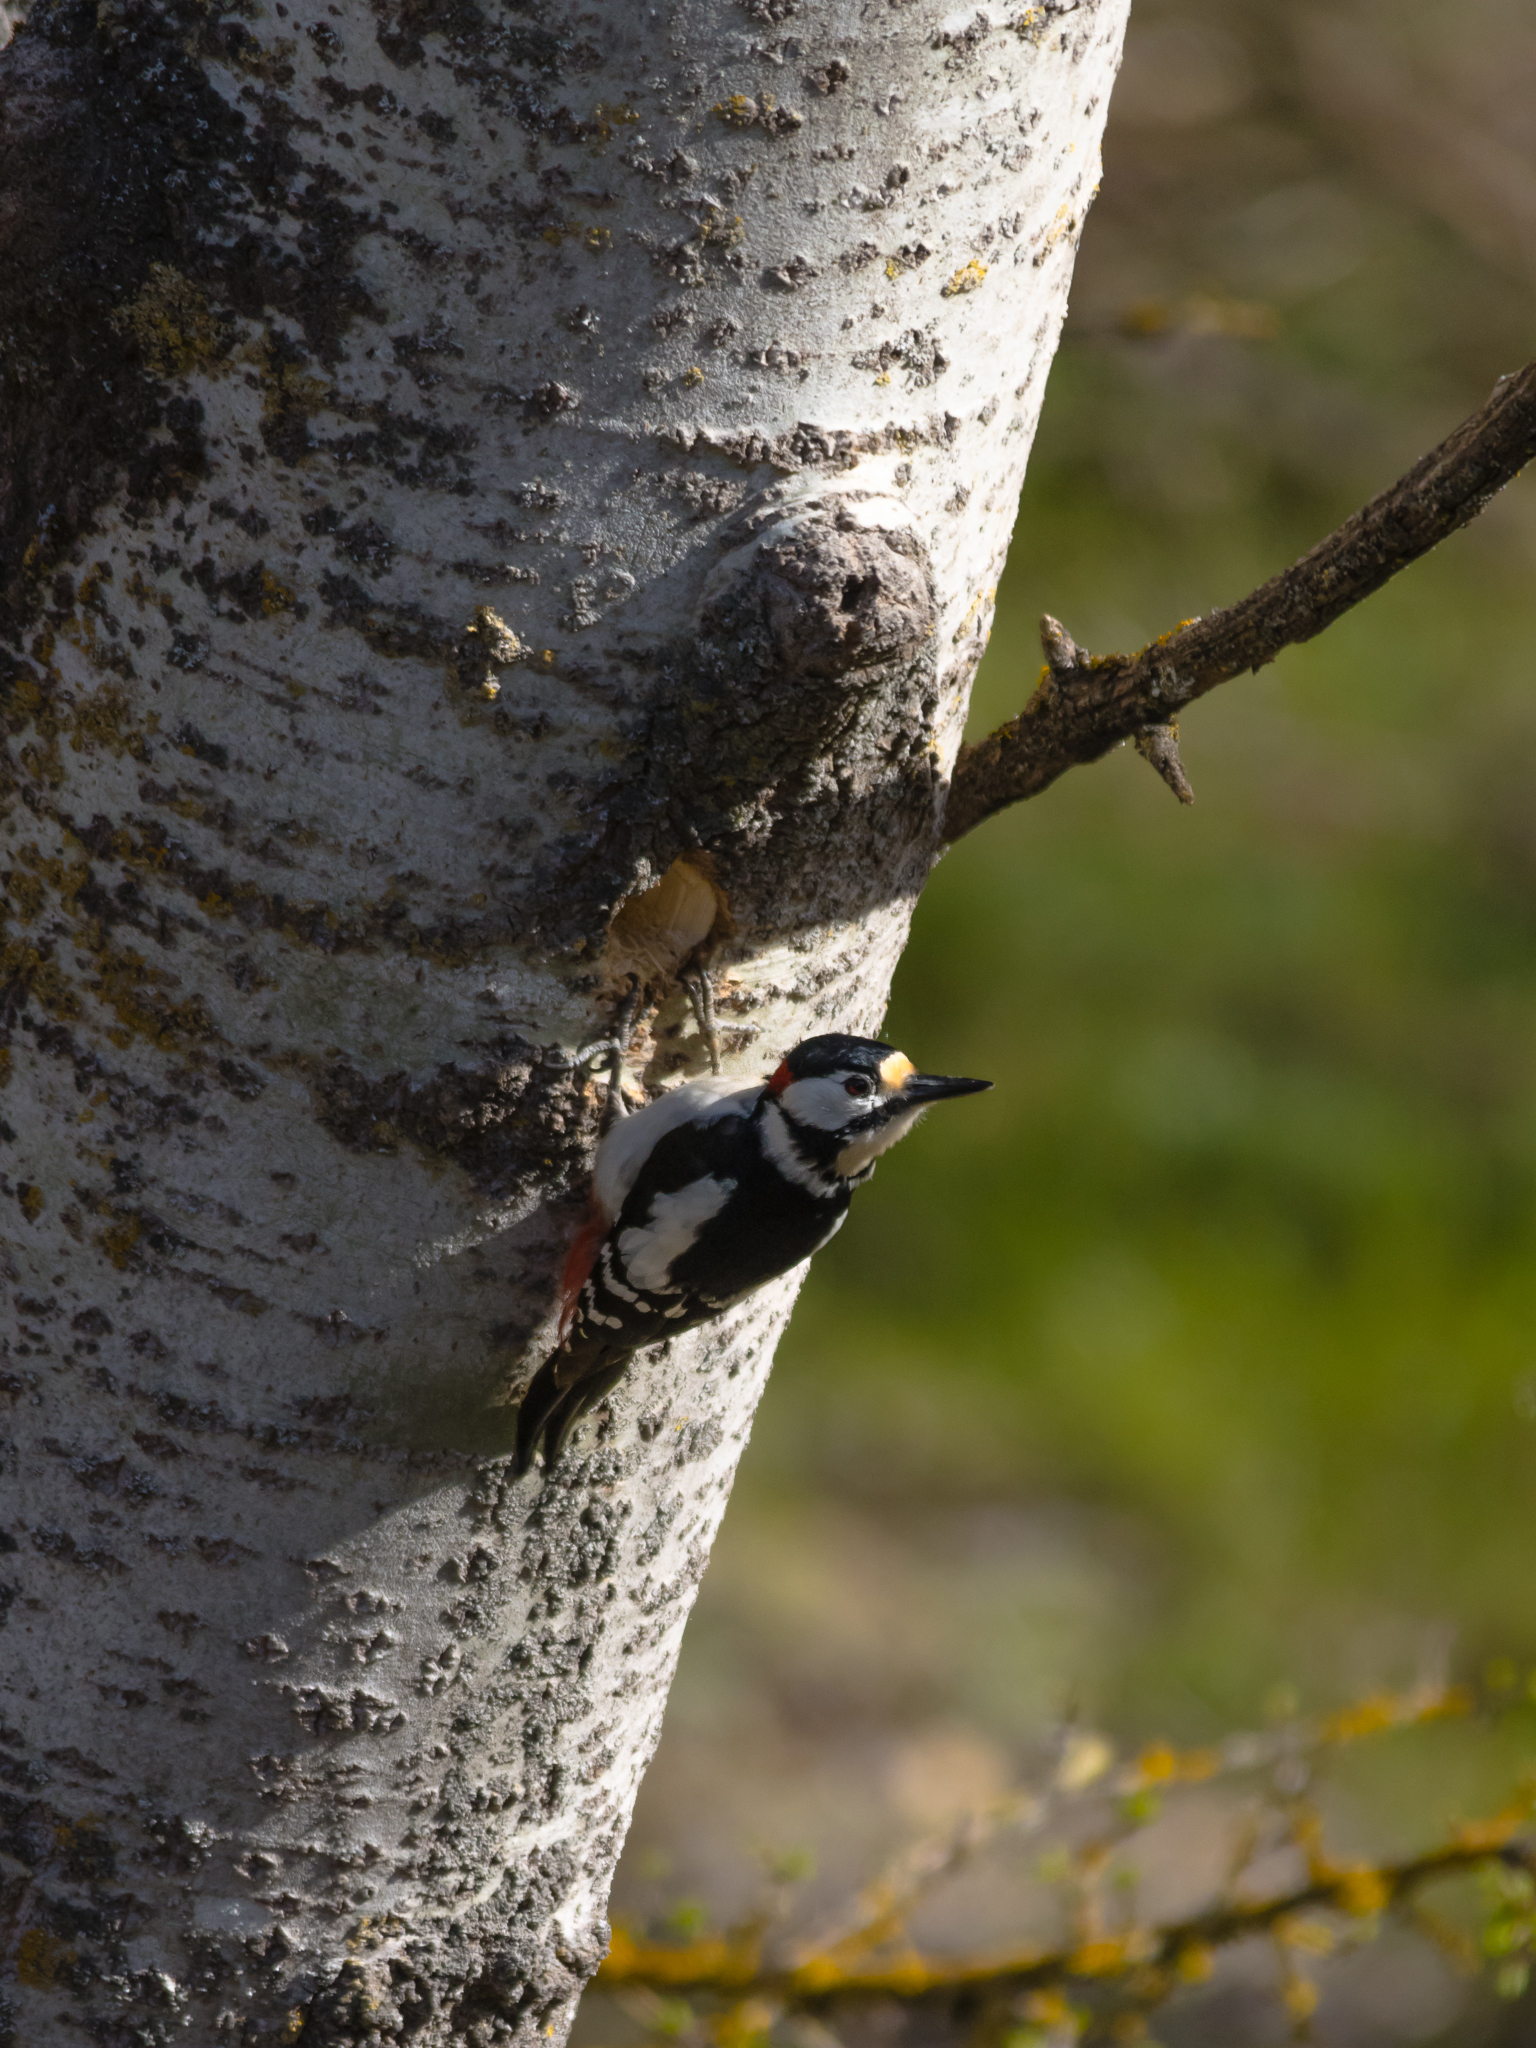 Spotted woodpecker at work...